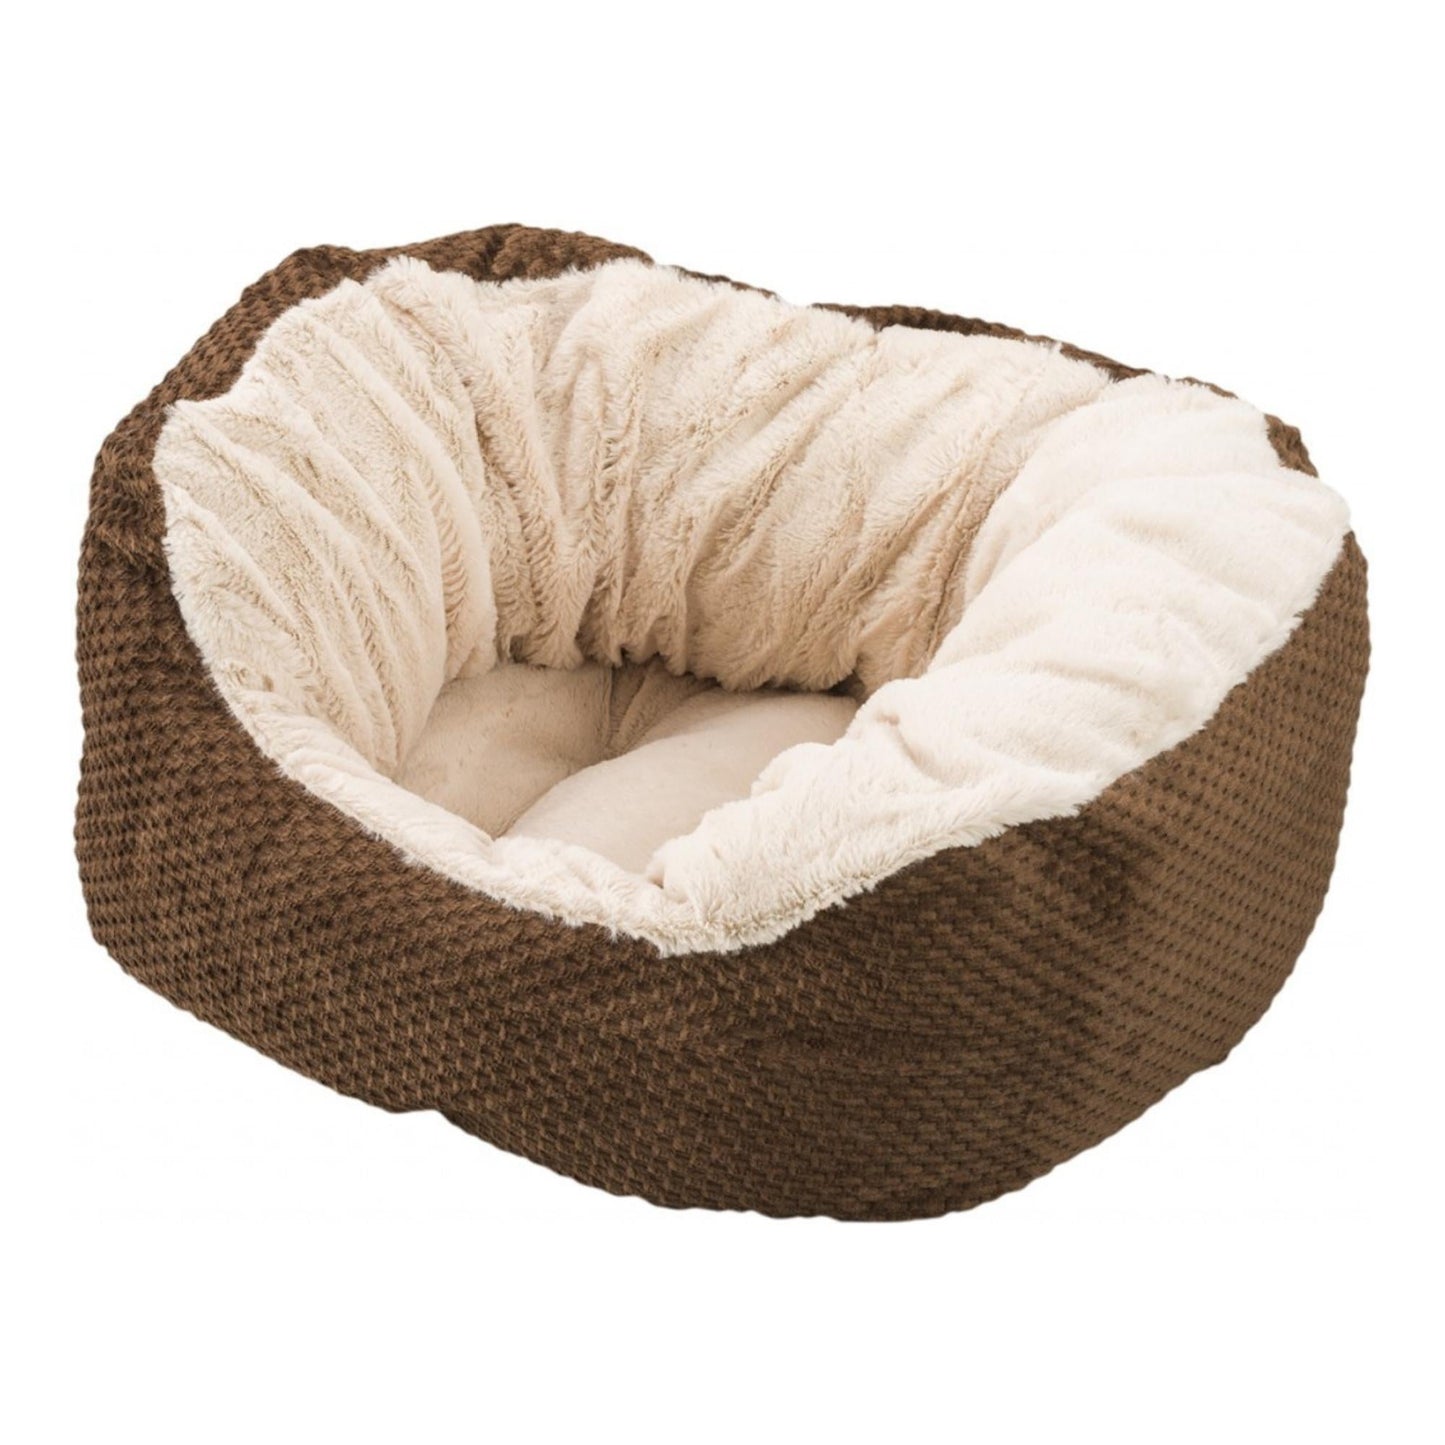 Ethical Pet Sleep Zone Checkerboard Napper 18" Chocolate